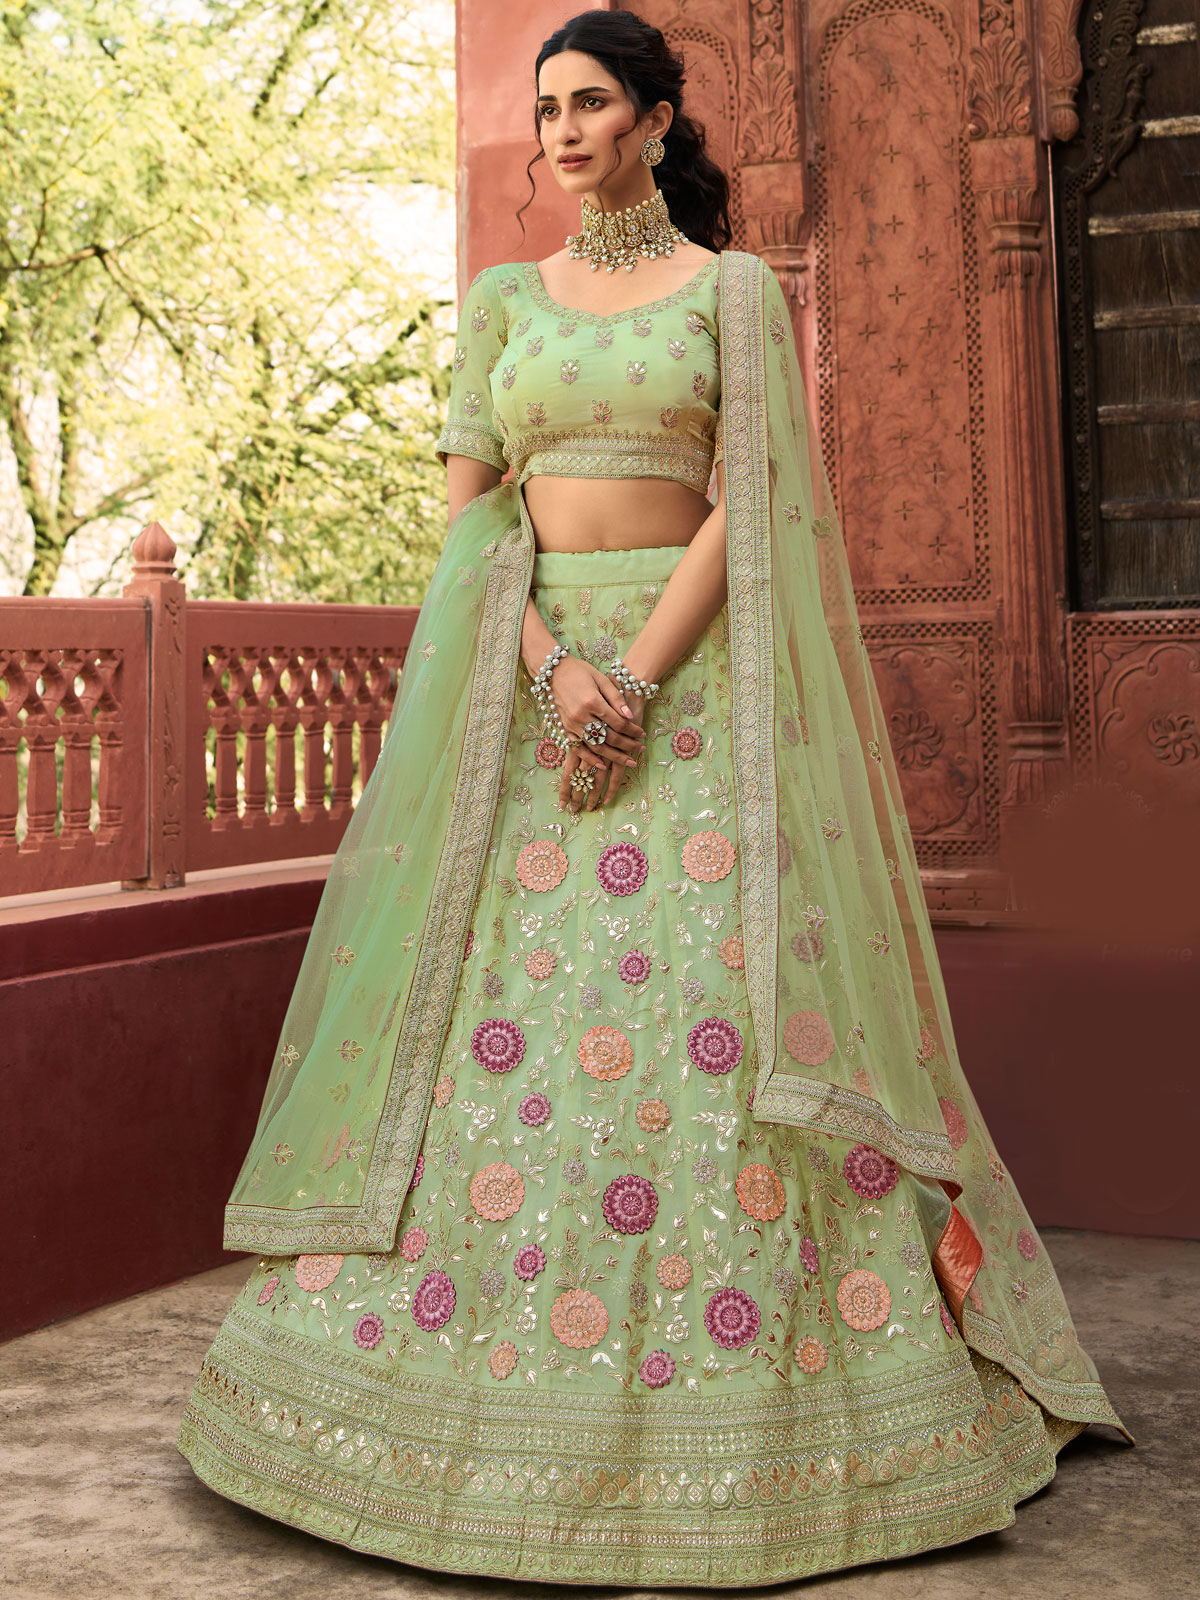 Featuring peach and pista green designer party wear lehenga set with  embroidery on top and bottom.… | Netted blouse designs, Party wear lehenga,  Kurta designs women